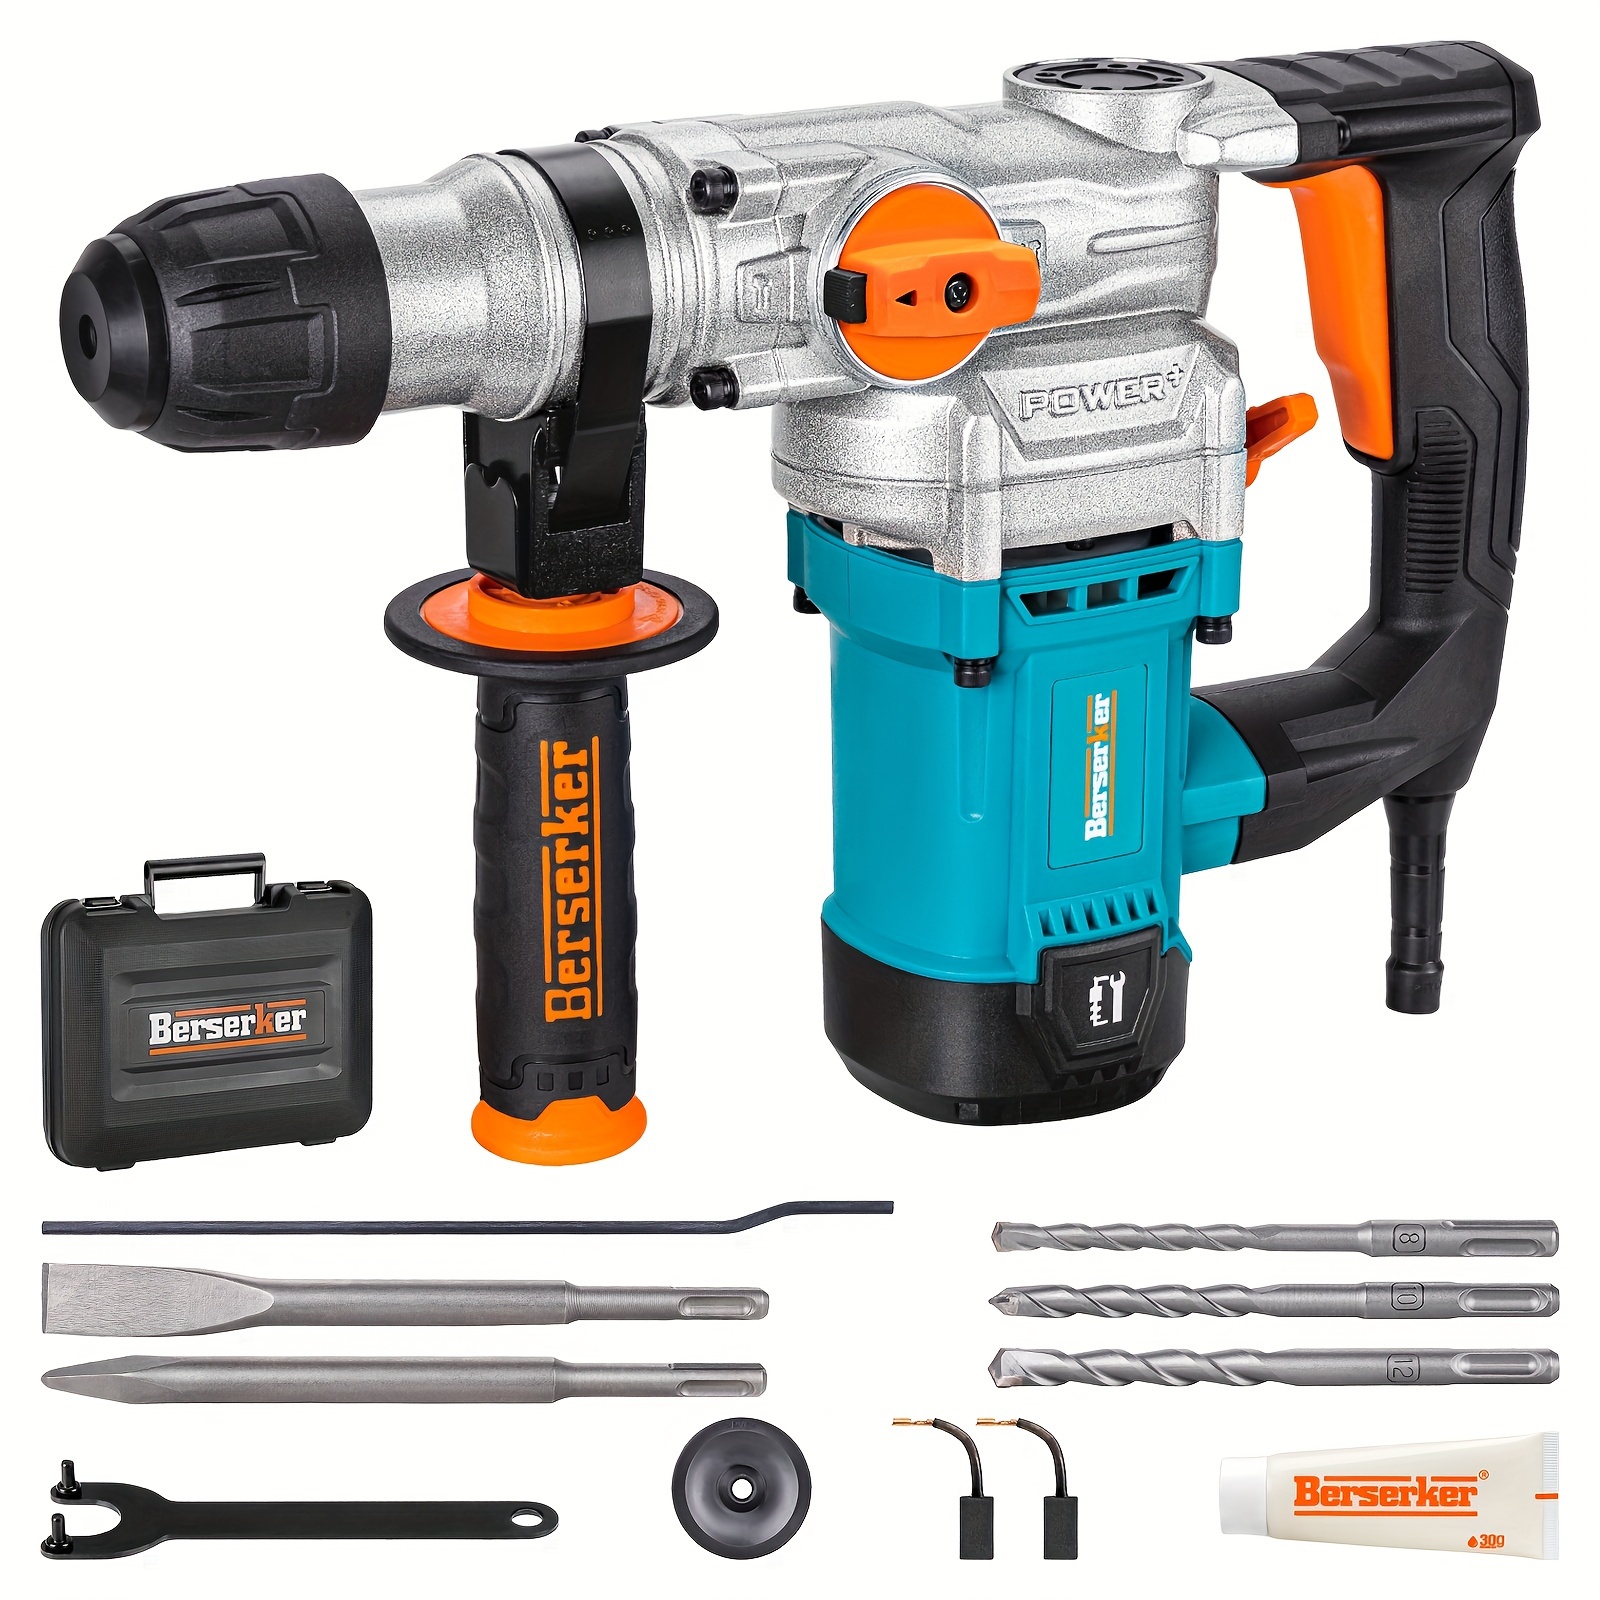 

1-1/8" Sds-plus Rotary Hammer Drill With Safety Clutch, 9 Amp 3 Functions Corded Rotomartillo For Concrete - Including 3 Drill Bits, Flat Chisel, Point Chisel, Carrying Case